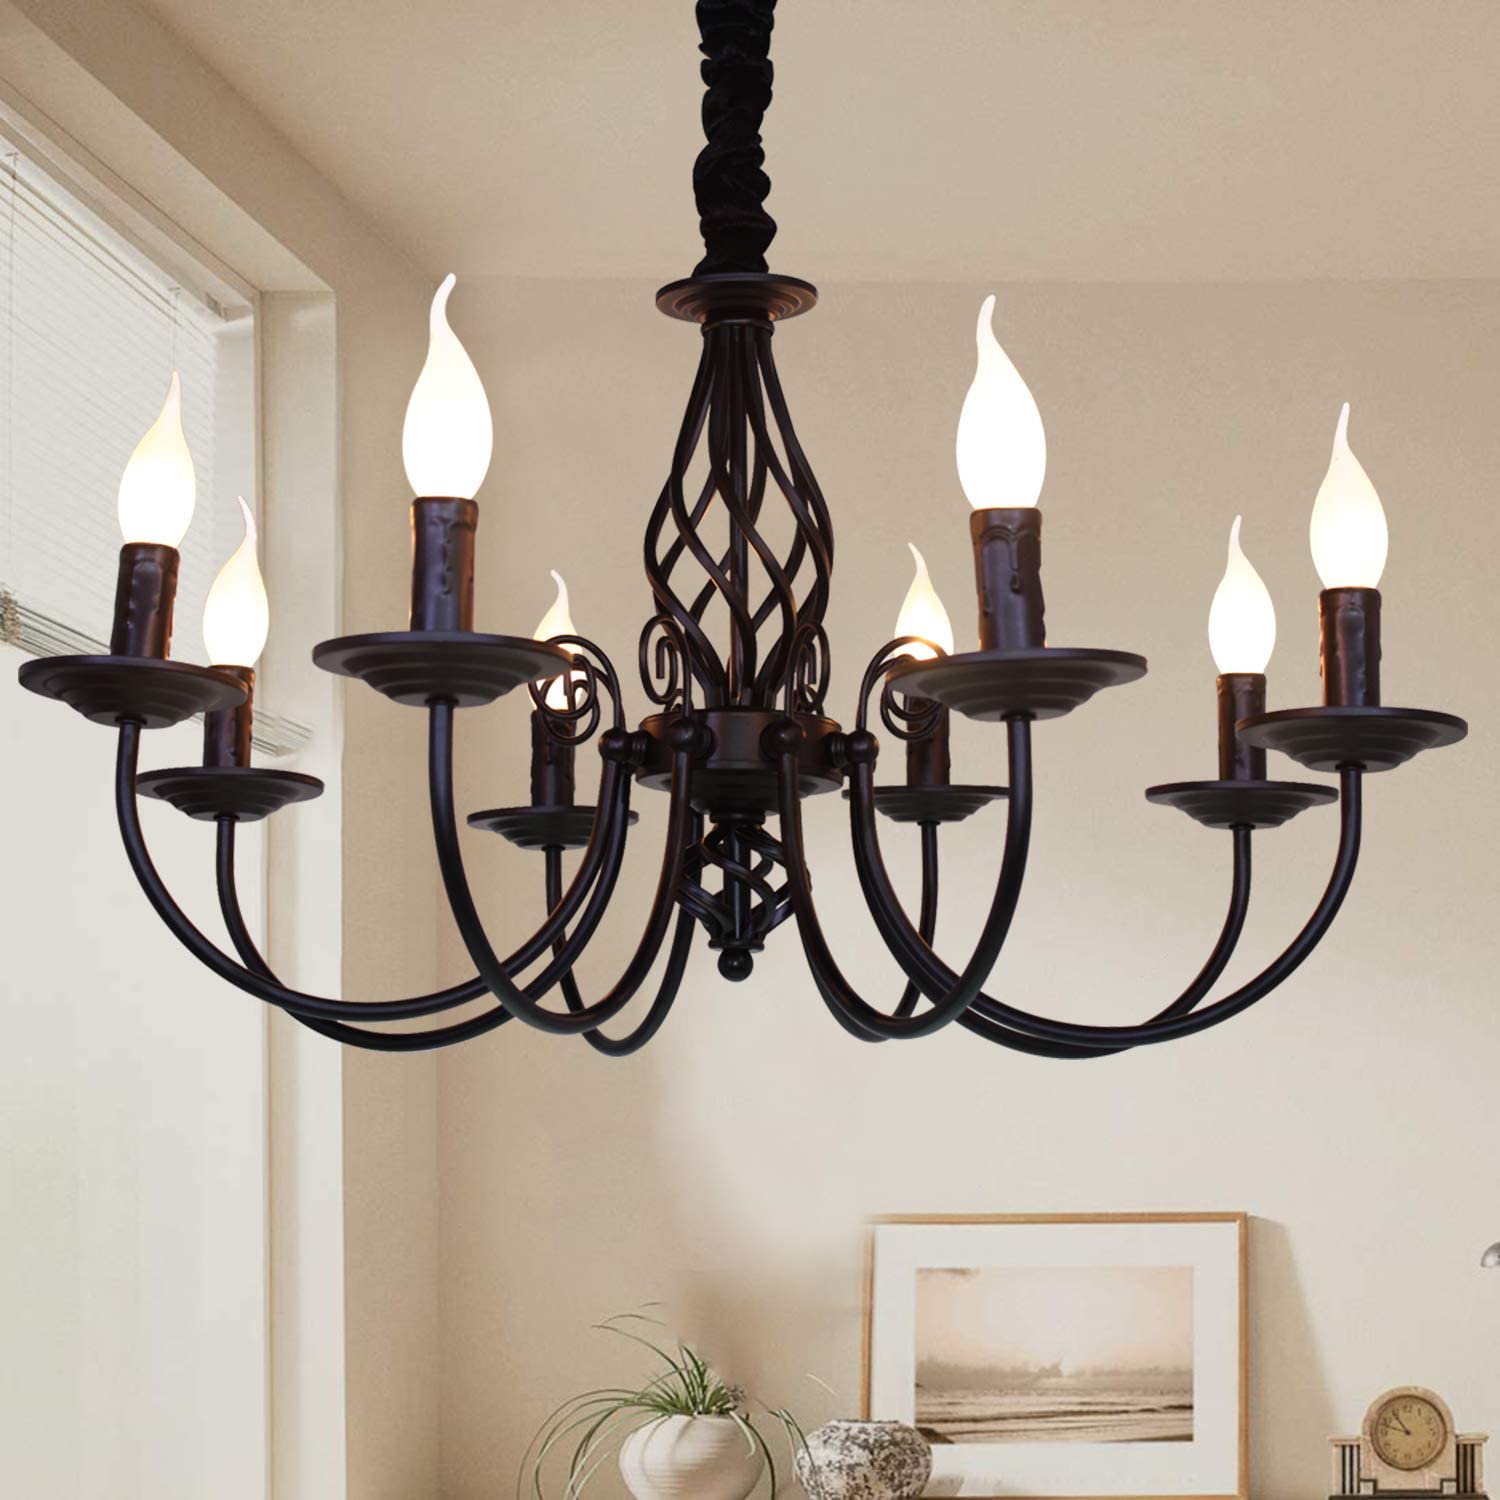 Ganeed Rustic Chandelier,8 Lights French Country Chandeliers,Metal Black Pendant Chandelier,Pendant Light Fixture for Island Kitchen Farmhouse,Dining Room,Foyer